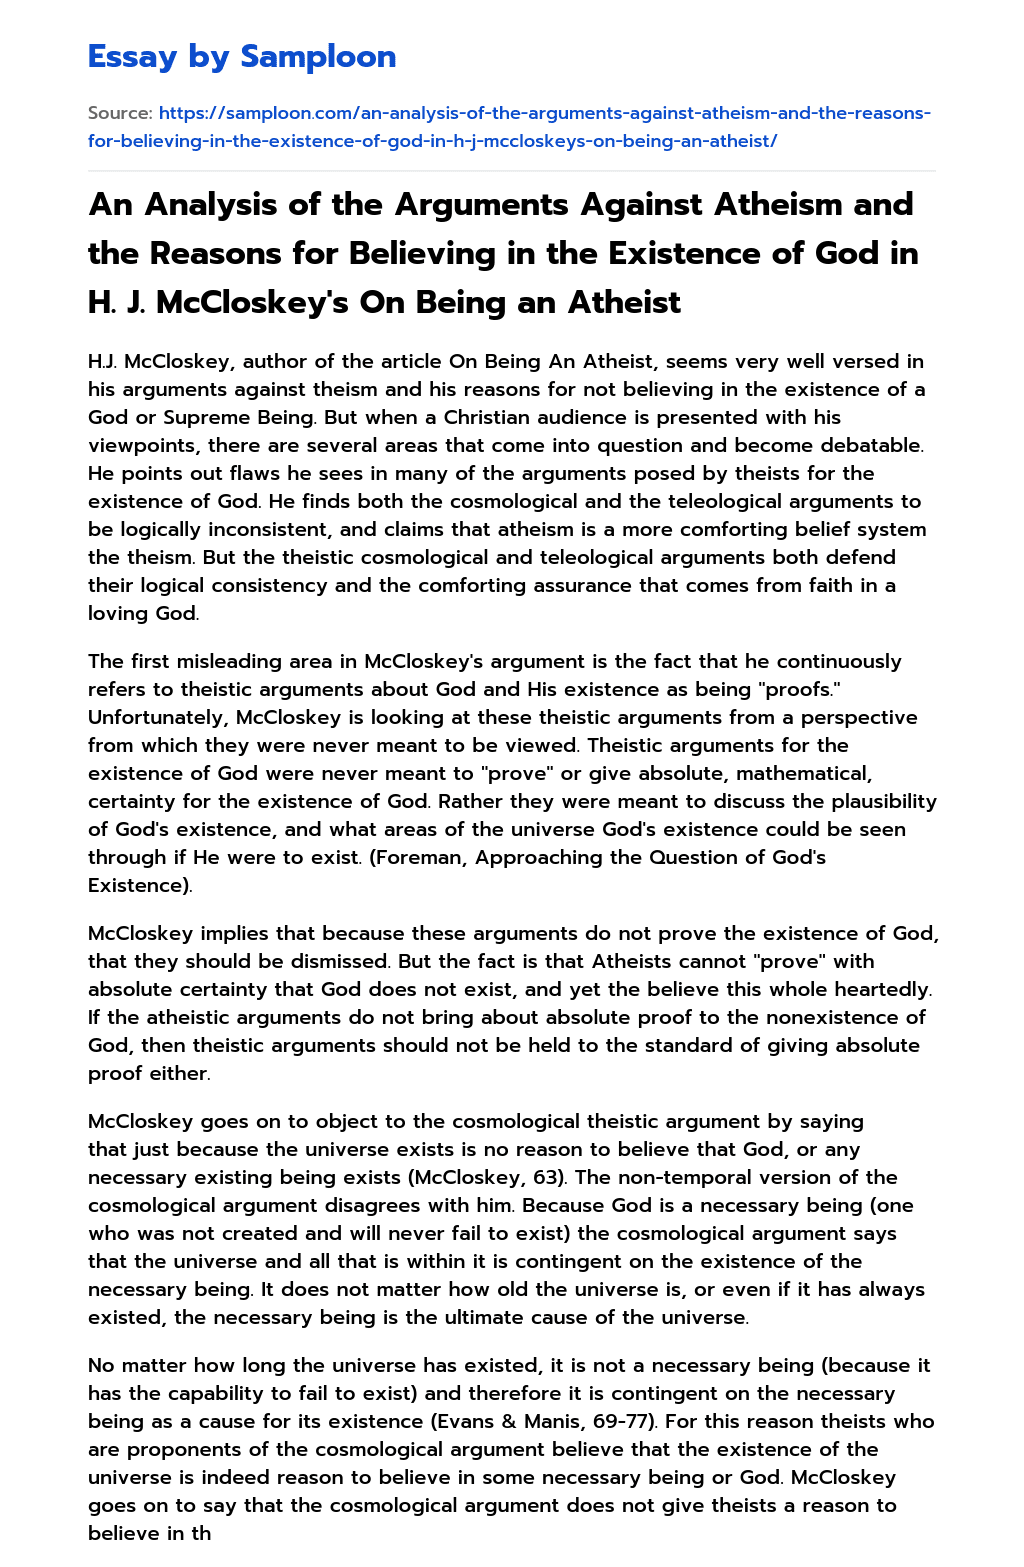 An Analysis of the Arguments Against Atheism and the Reasons for Believing in the Existence of God in H. J. McCloskey’s On Being an Atheist essay